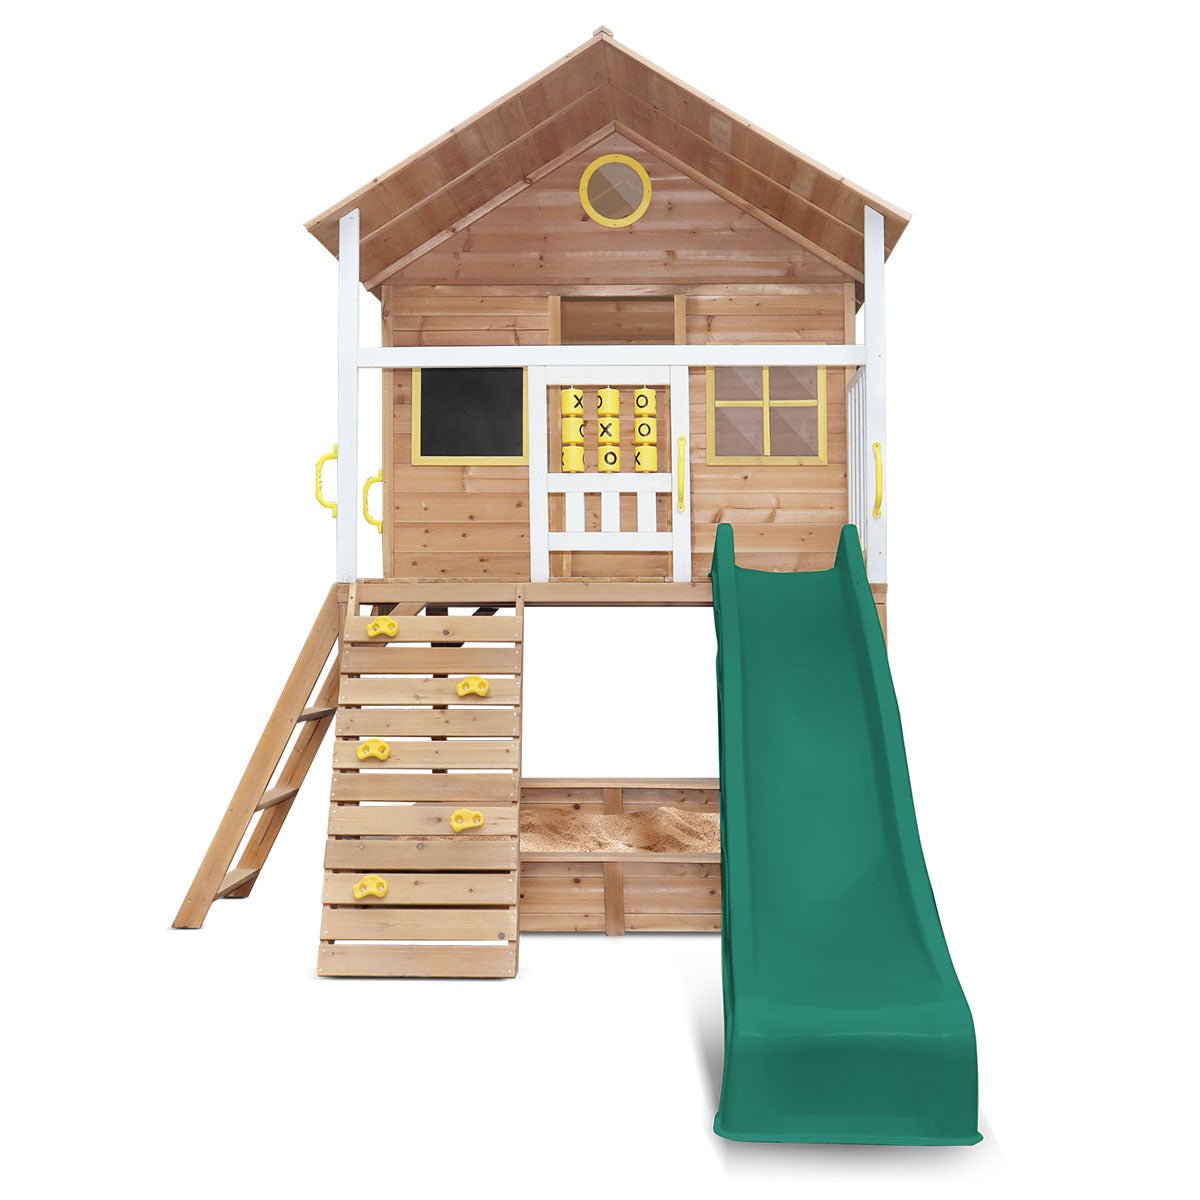 Warrigal Cubby House with Green Slide: Fun and Exploration for Kids